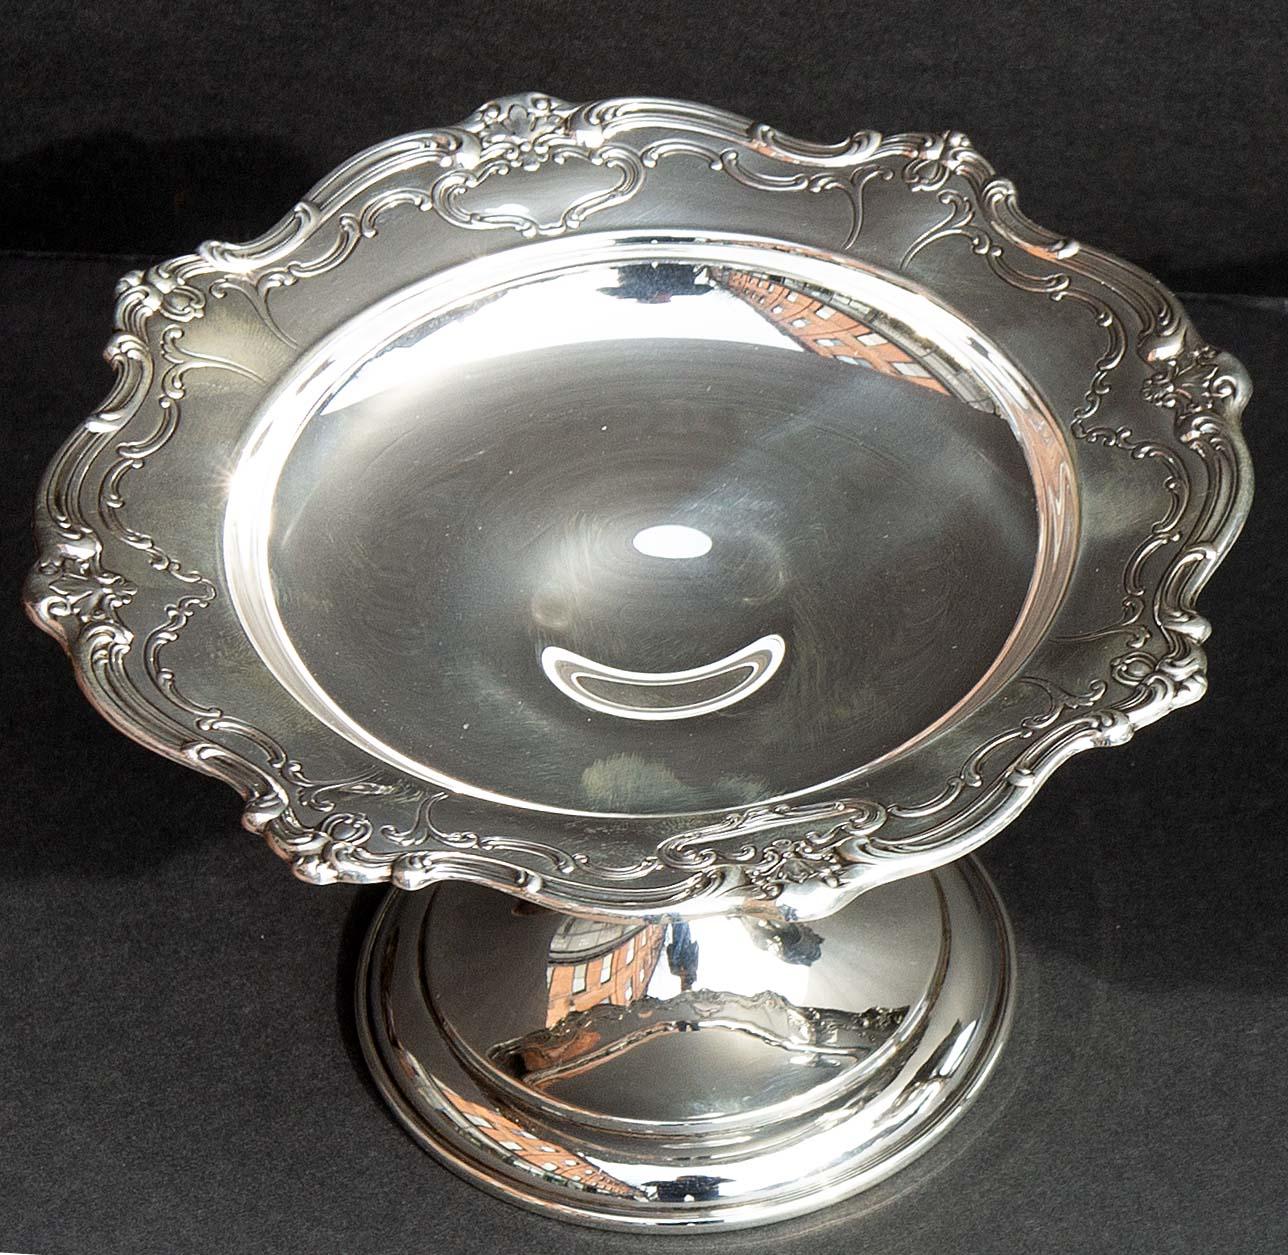 North American Pair Chantilly Sterling Compotes by Gorham